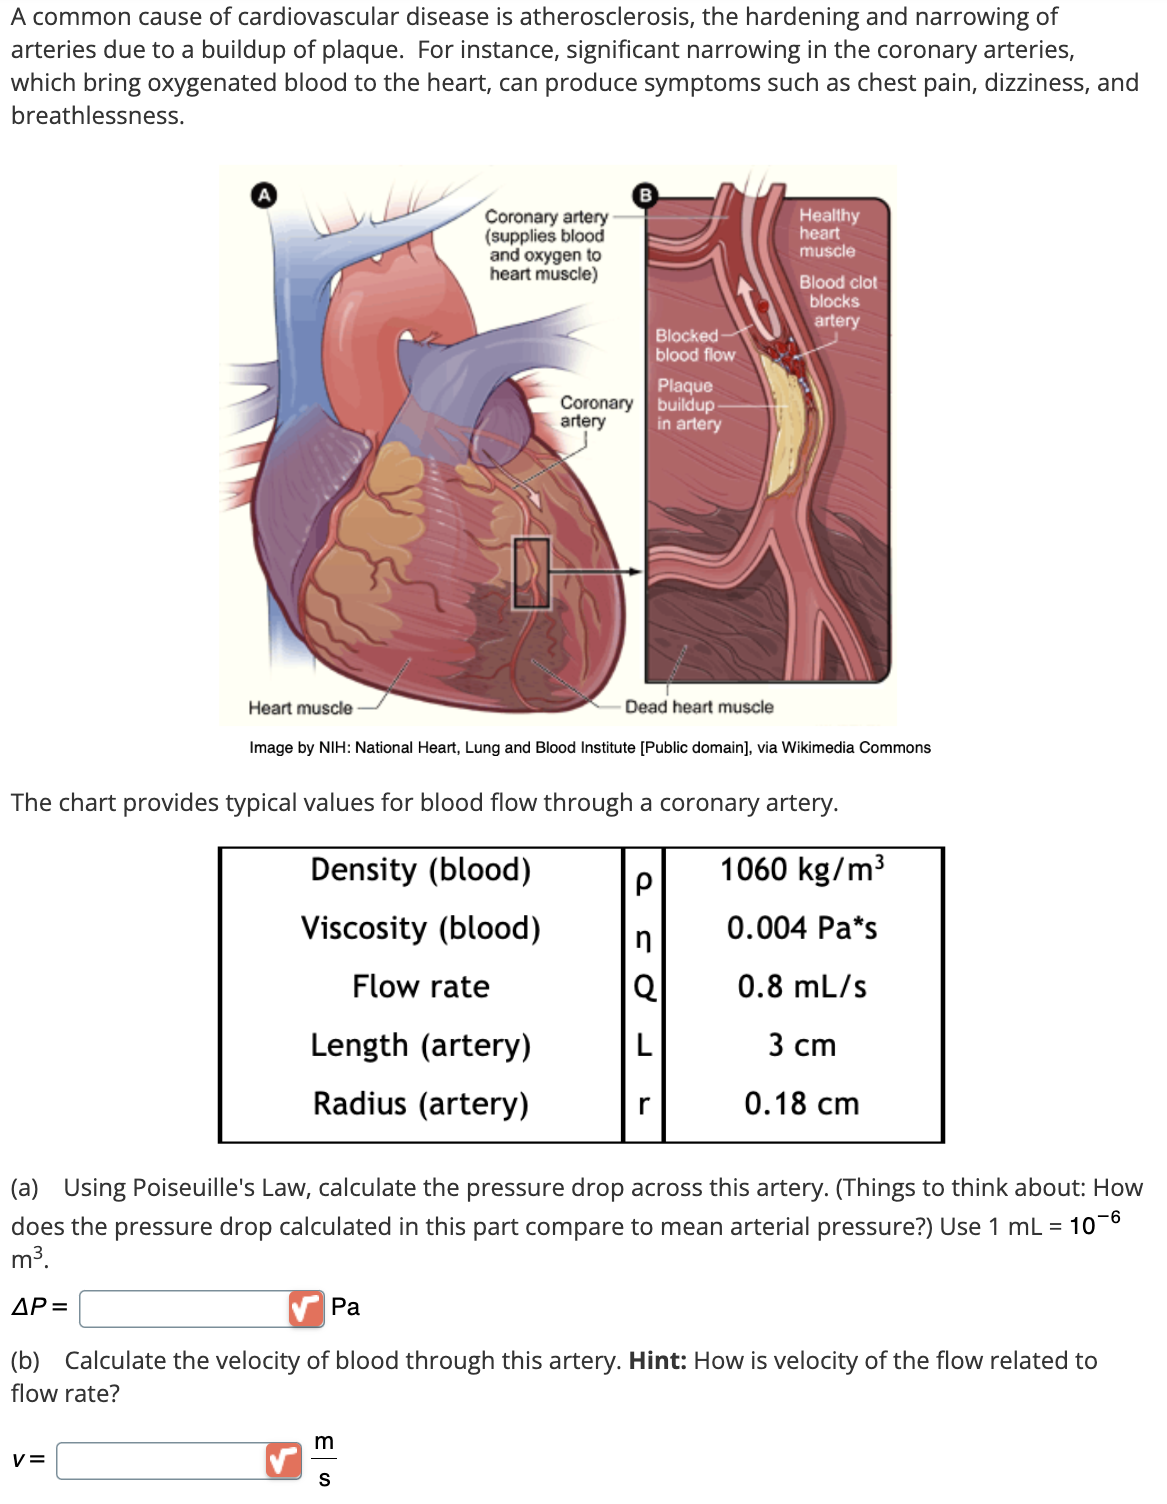 A common cause of cardiovascular disease is atherosclerosis, the hardening and narrowing of
arteries due to a buildup of plaque. For instance, significant narrowing in the coronary arteries,
which bring oxygenated blood to the heart, can produce symptoms such as chest pain, dizziness, and
breathlessness.
Heart muscle
Coronary artery
(supplies blood
and oxygen to
heart muscle)
Healthy
heart
muscle
Blood clot
blocks
artery
Blocked
blood flow
Plaque
Coronary
artery
buildup
in artery
Dead heart muscle
Image by NIH: National Heart, Lung and Blood Institute [Public domain], via Wikimedia Commons
The chart provides typical values for blood flow through a coronary artery.
1060 kg/m³
Density (blood)
P
Viscosity (blood)
0.004 Pa*s
Flow rate
Q
0.8 mL/s
Length (artery)
L
3 cm
Radius (artery)
r
0.18 cm
(a) Using Poiseuille's Law, calculate the pressure drop across this artery. (Things to think about: How
does the pressure drop calculated in this part compare to mean arterial pressure?) Use 1 mL = 106
m³.
AP=
Pa
(b) Calculate the velocity of blood through this artery. Hint: How is velocity of the flow related to
flow rate?
v=
m
ES